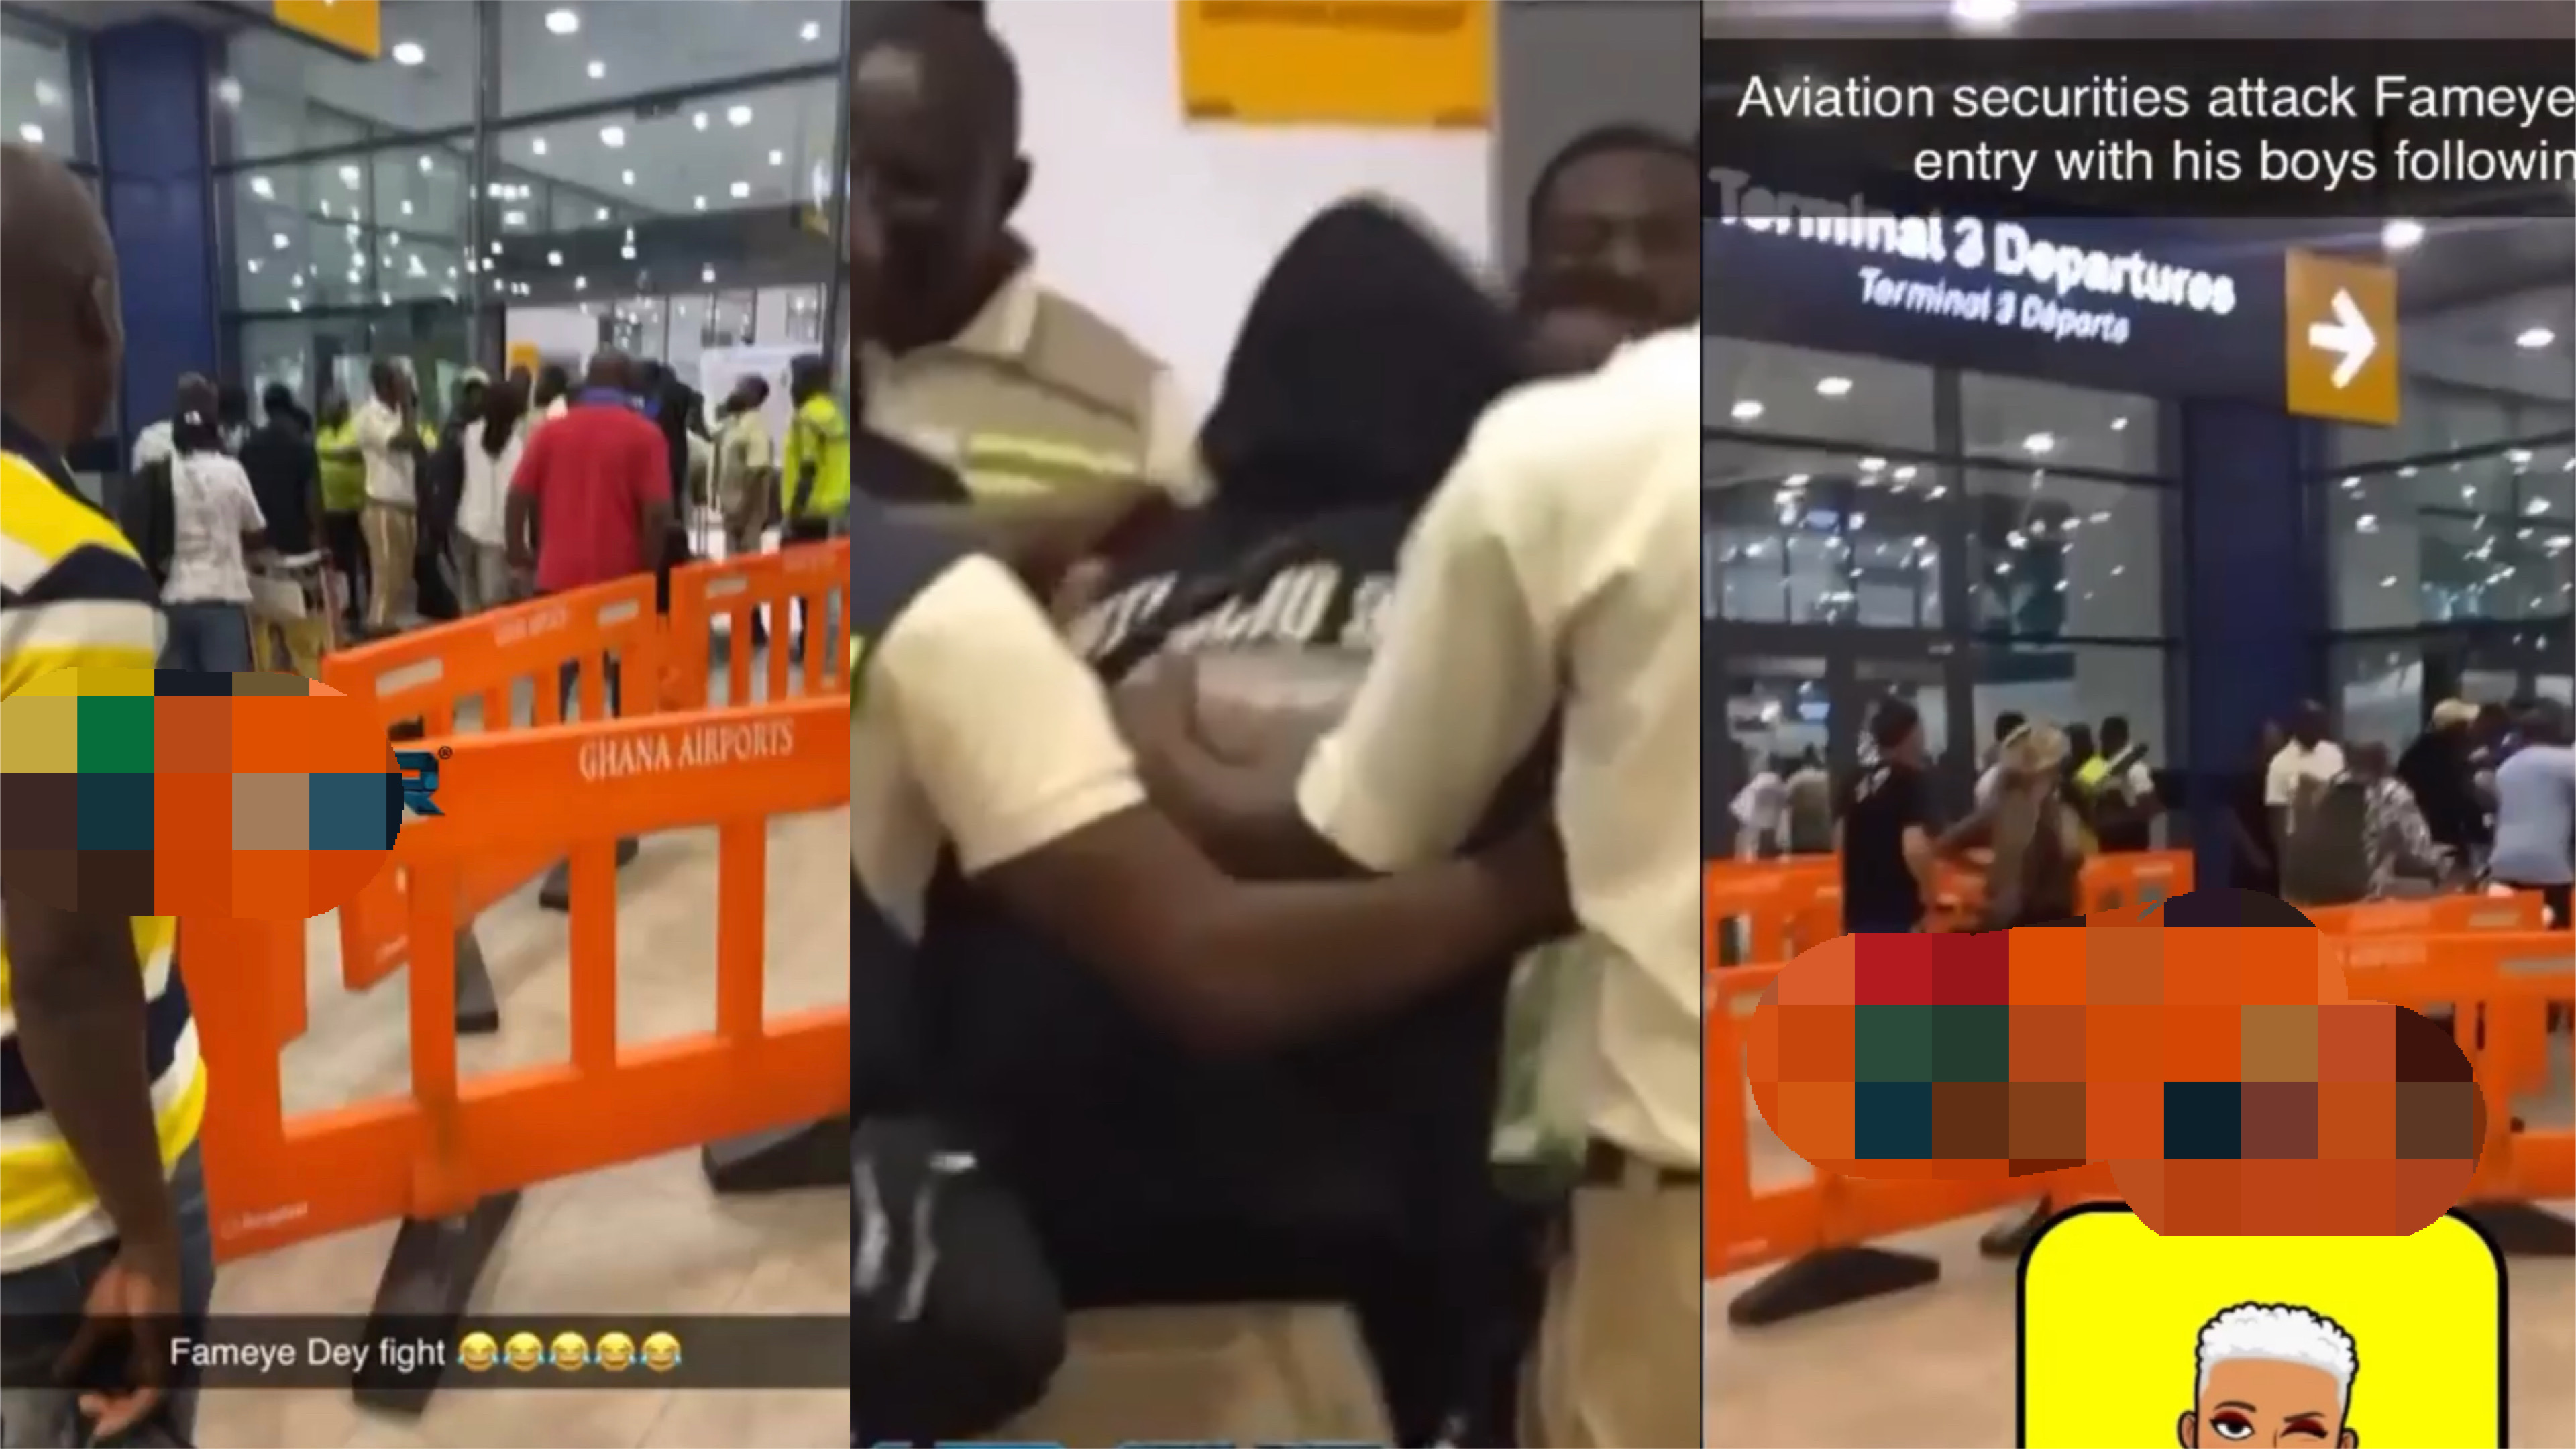 Chaos at Airport as Fameye and team clash with security officials (VIDEO)